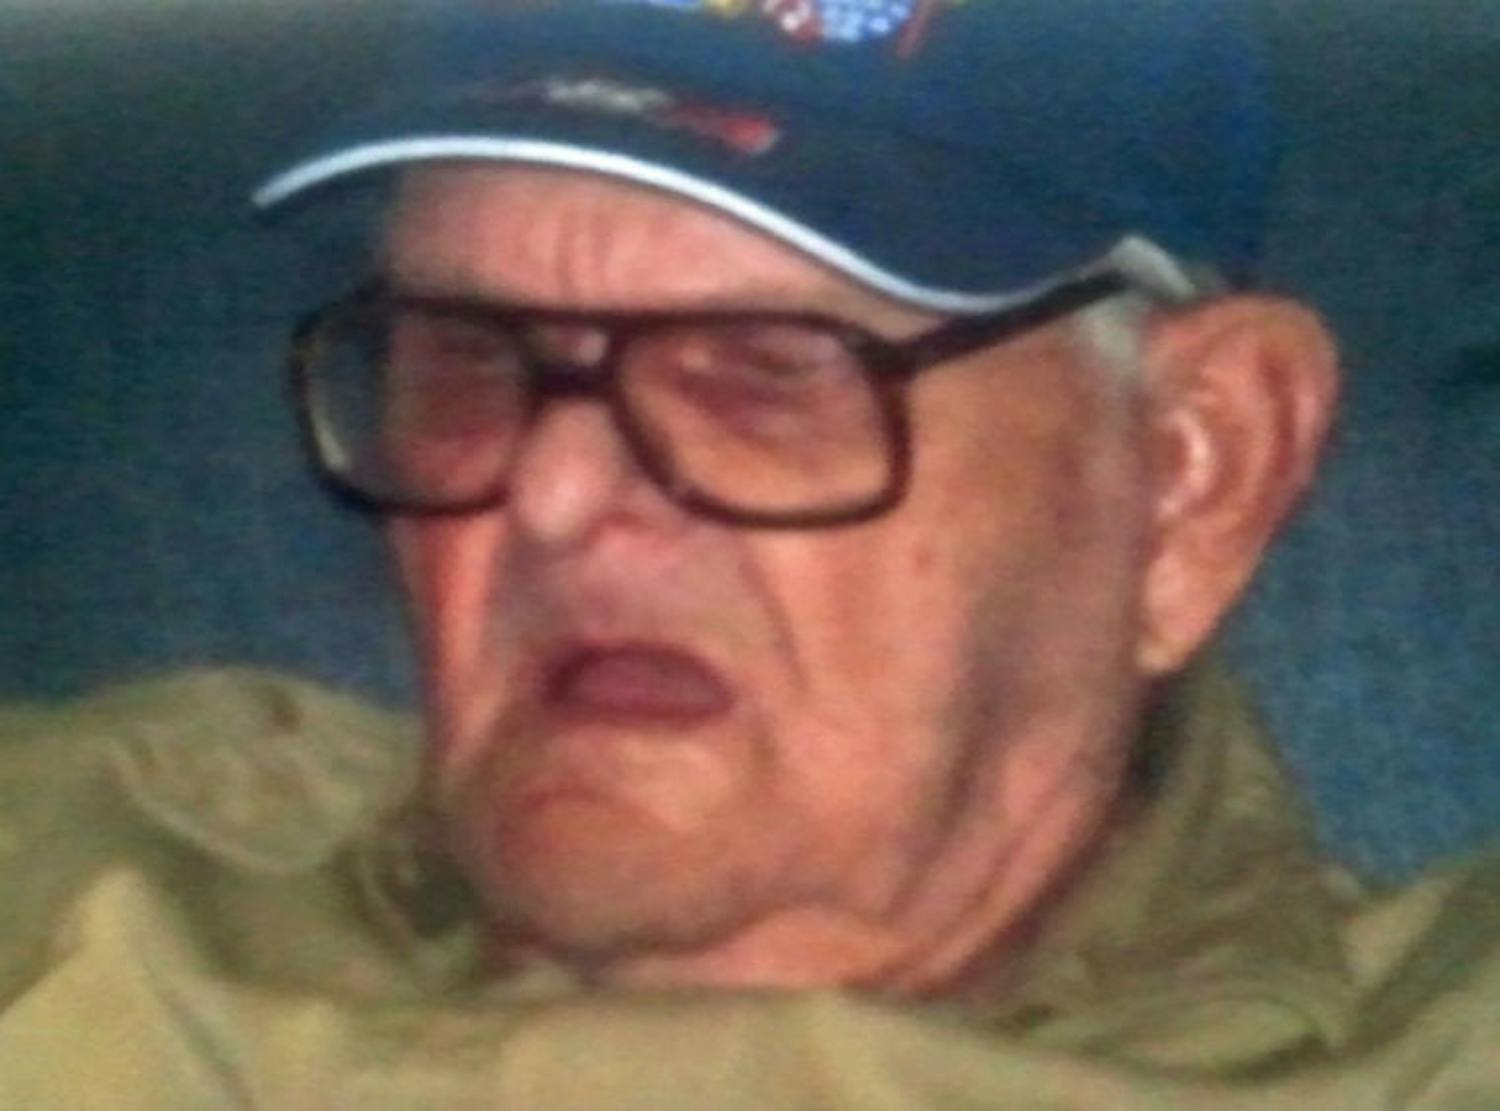 BREAKING: Body of missing 84-year-old man found  